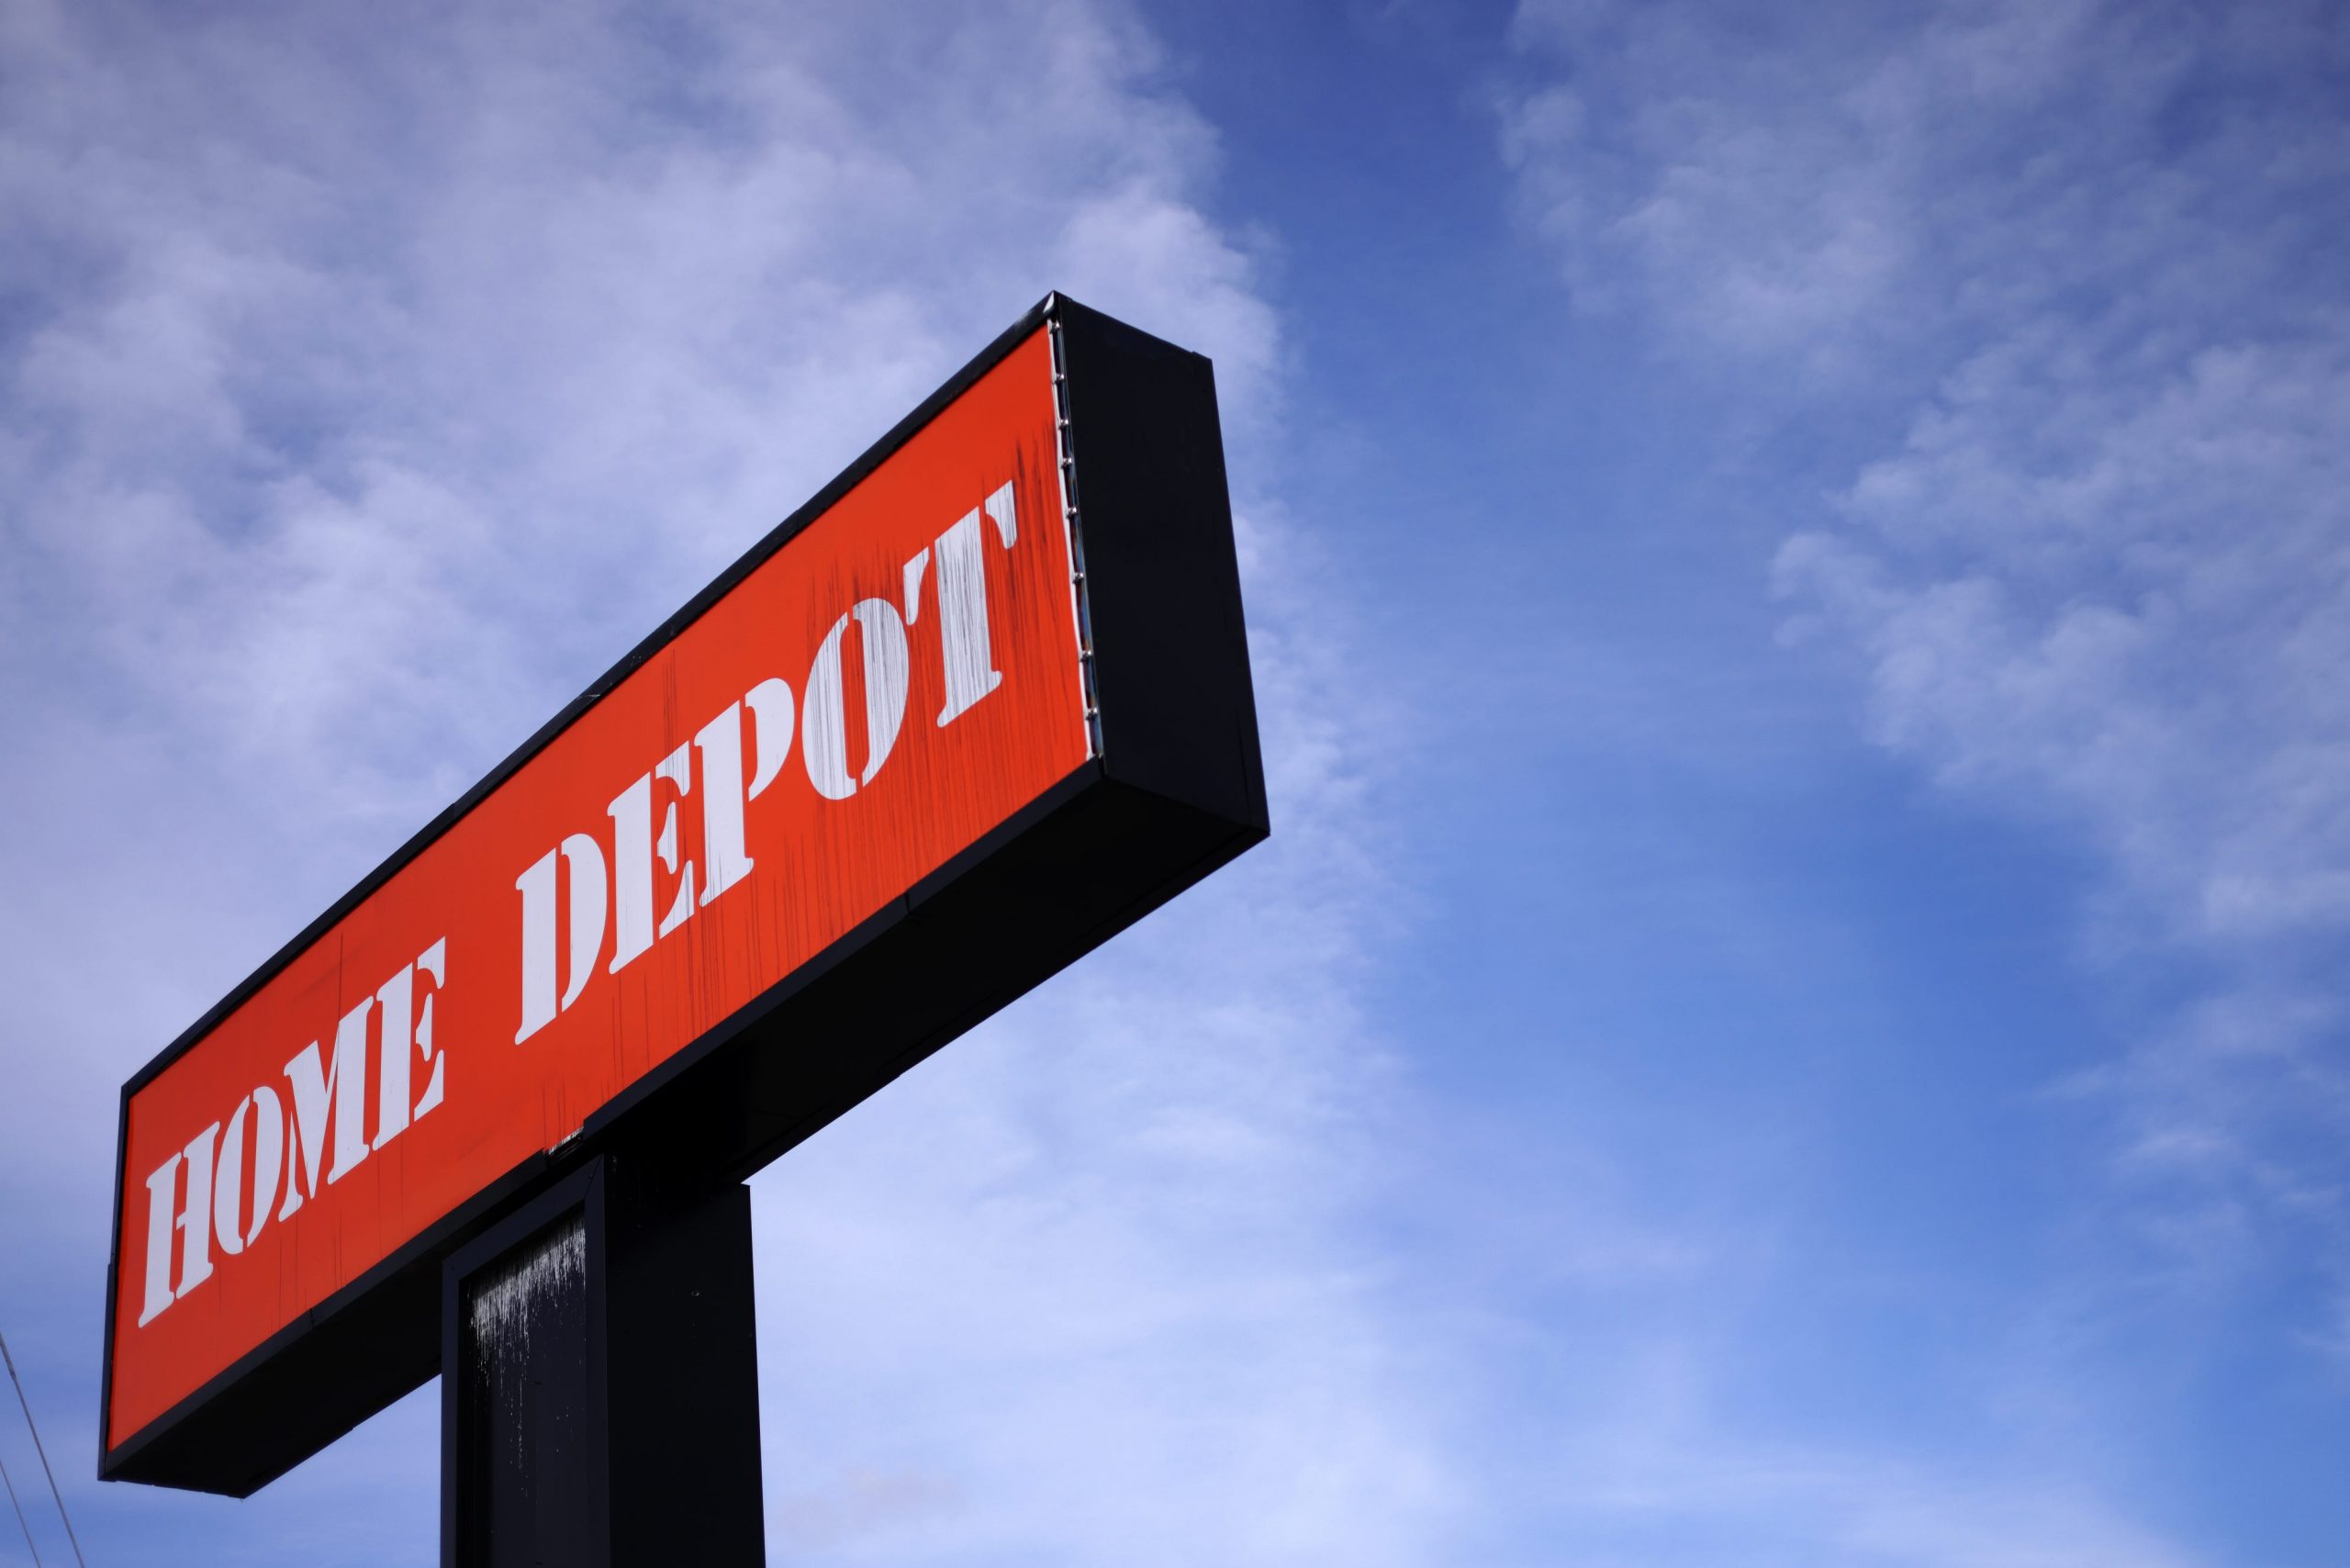 A bright orange sign for Home Depot stands tall against a blue sky with clouds.